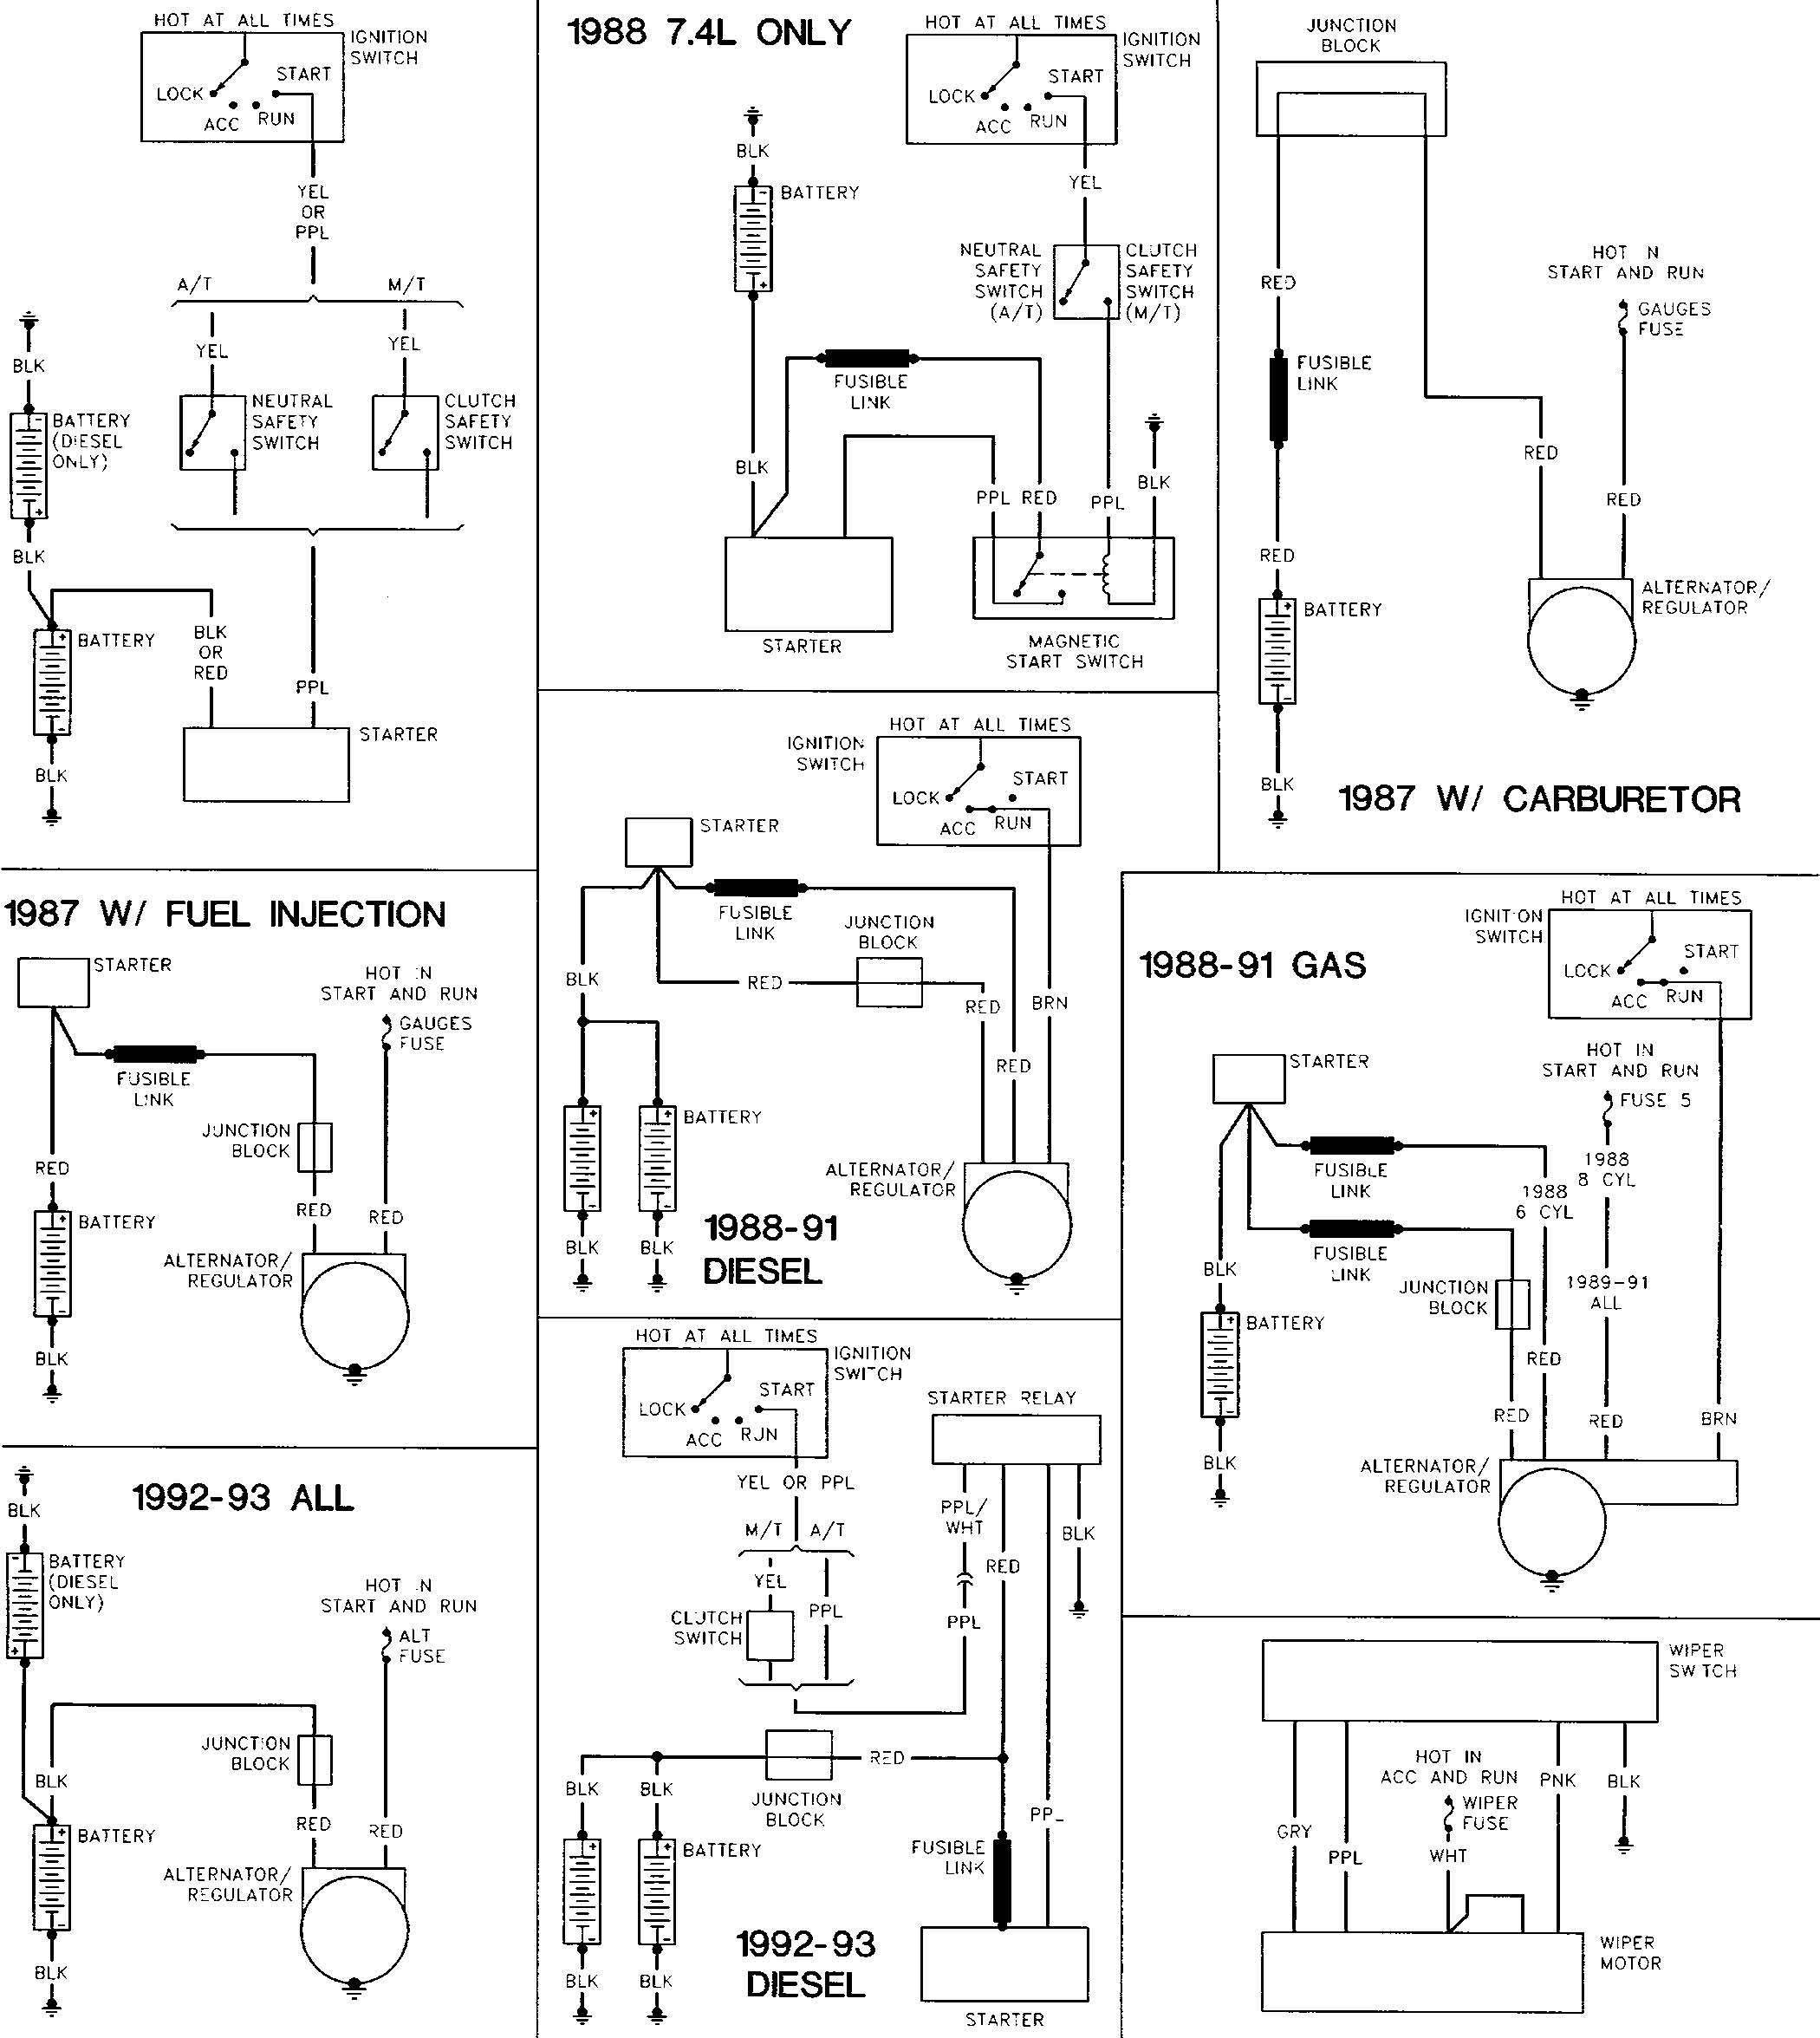 Fleetwood Motorhome Chassis Wiring Diagrams | Wiring Diagram - Fleetwood Motorhome Wiring Diagram